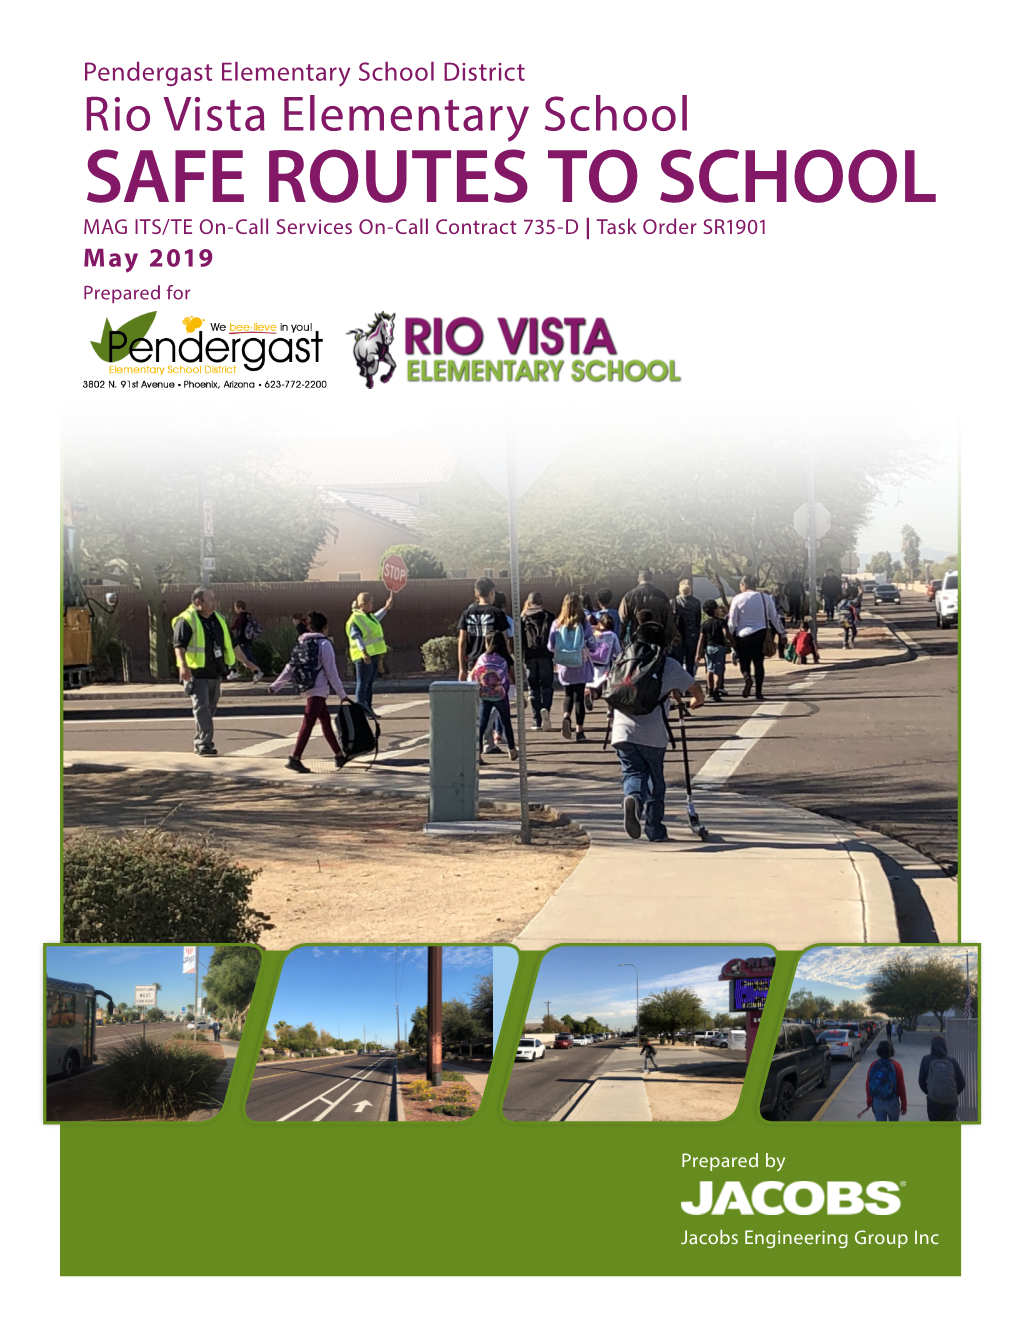 Rio Vista Elementary School SAFE ROUTES to SCHOOL MAG ITS/TE On-Call Services On-Call Contract 735-D | Task Order SR1901 May 2019 Prepared For